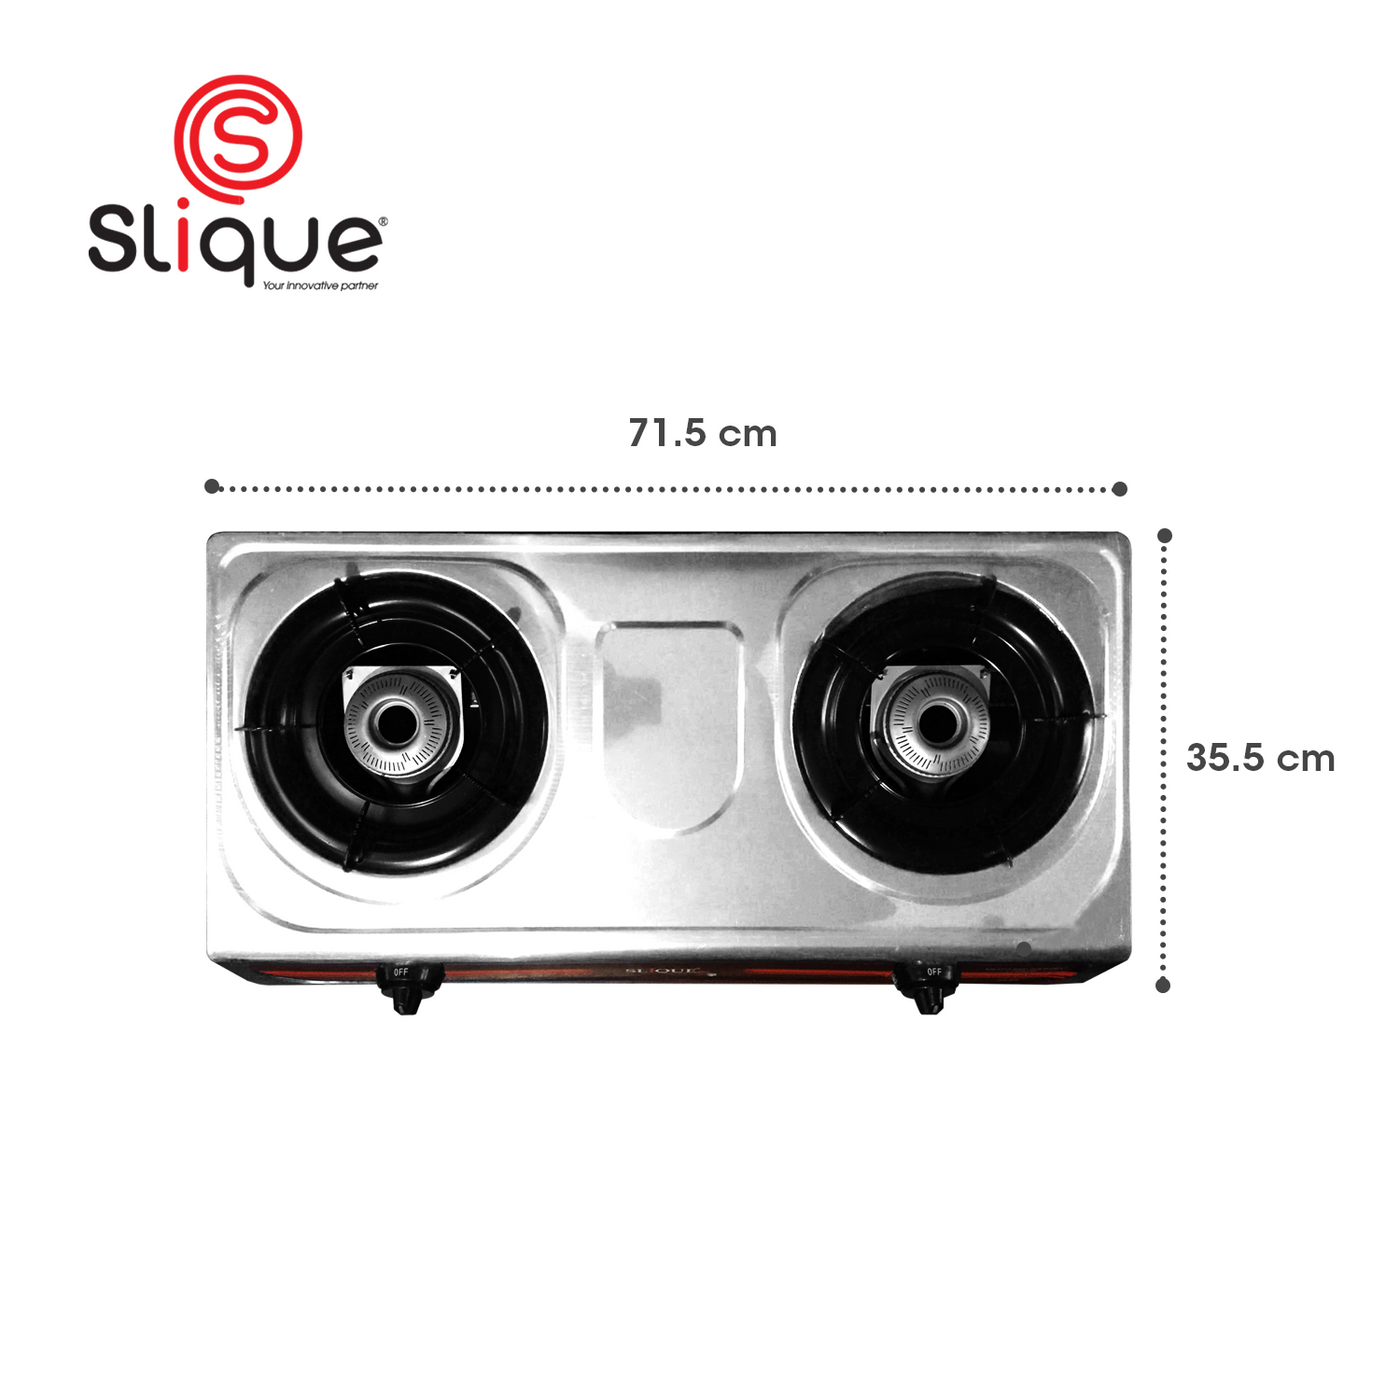 SLIQUE Premium Stainless Steel Double Gas Burner Auto Ignition Cooking Essentials Amazing Gift Idea For Any Occasion!